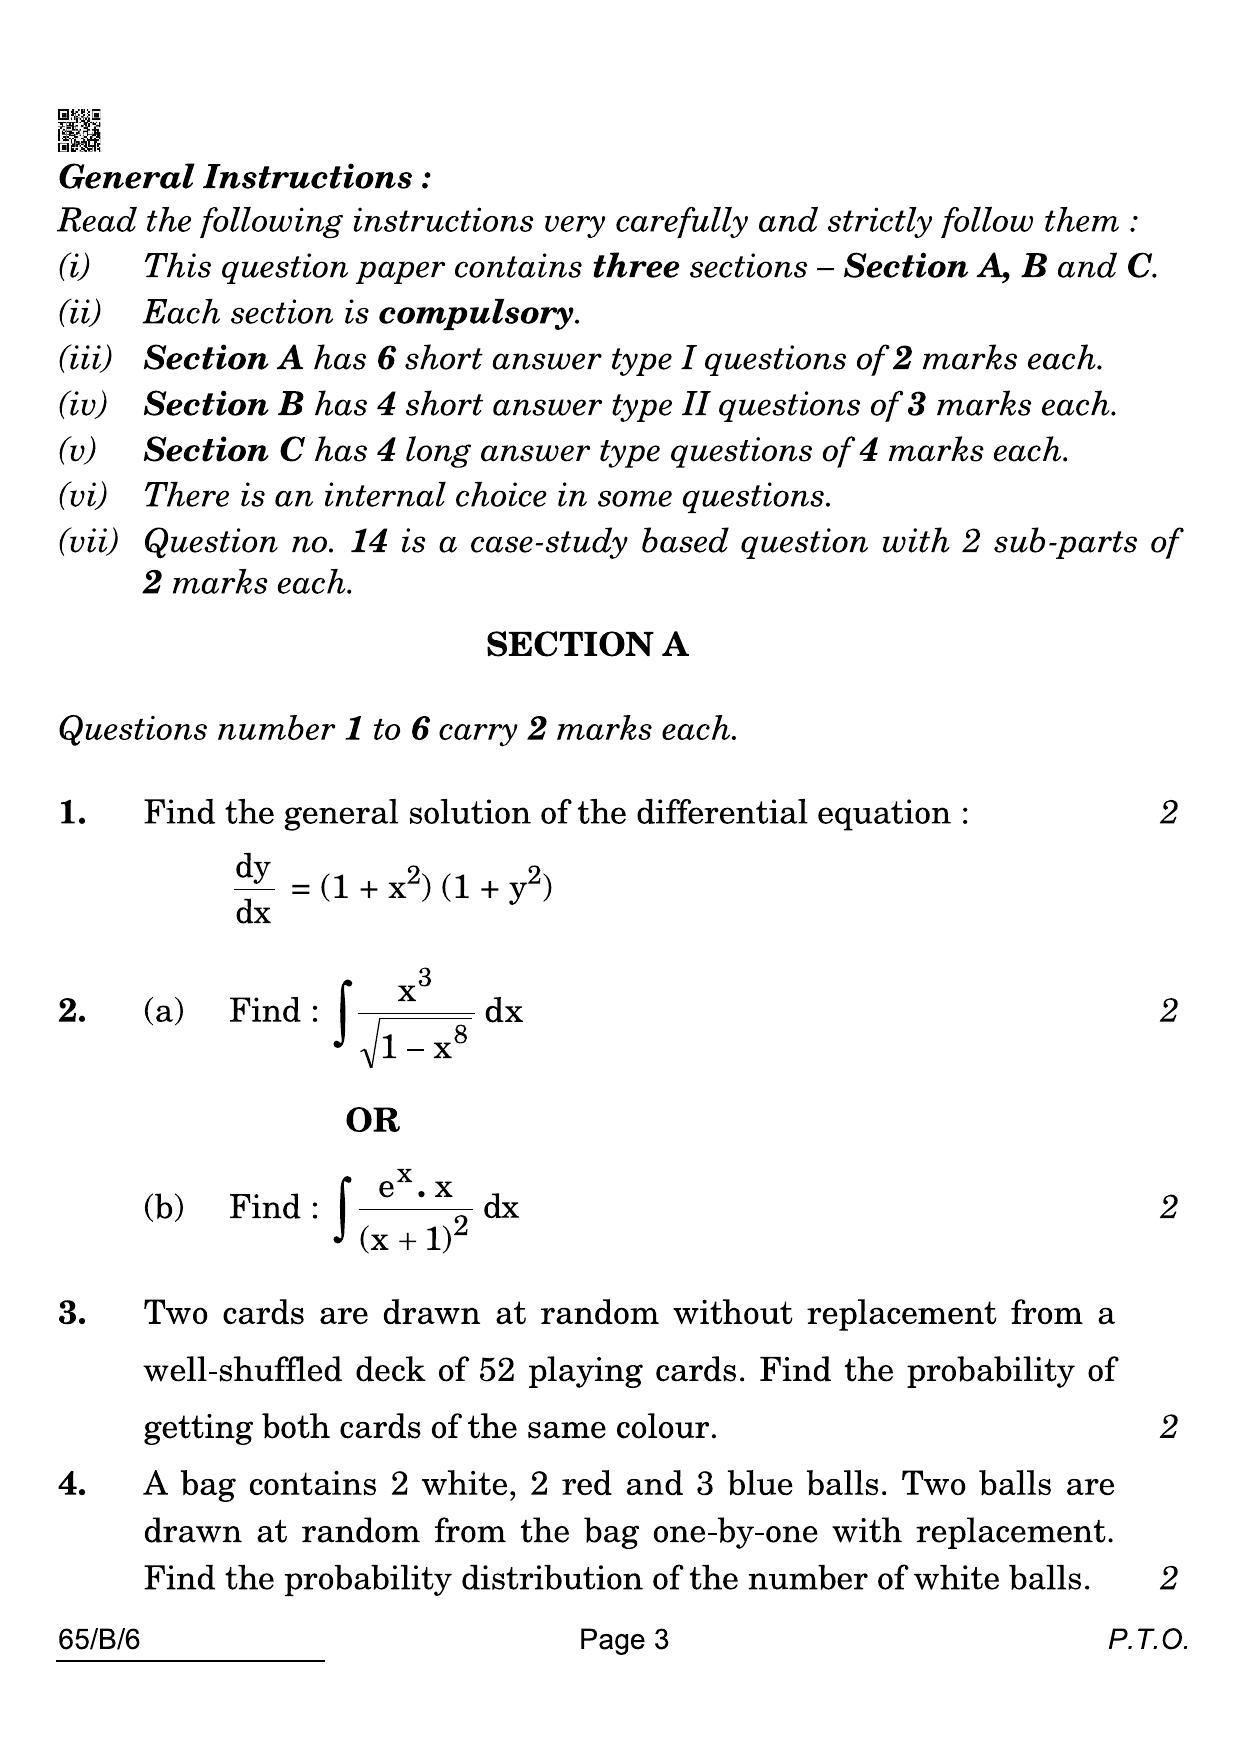 CBSE Class 12 65-B-6 Maths Blind 2022 Compartment Question Paper - Page 3